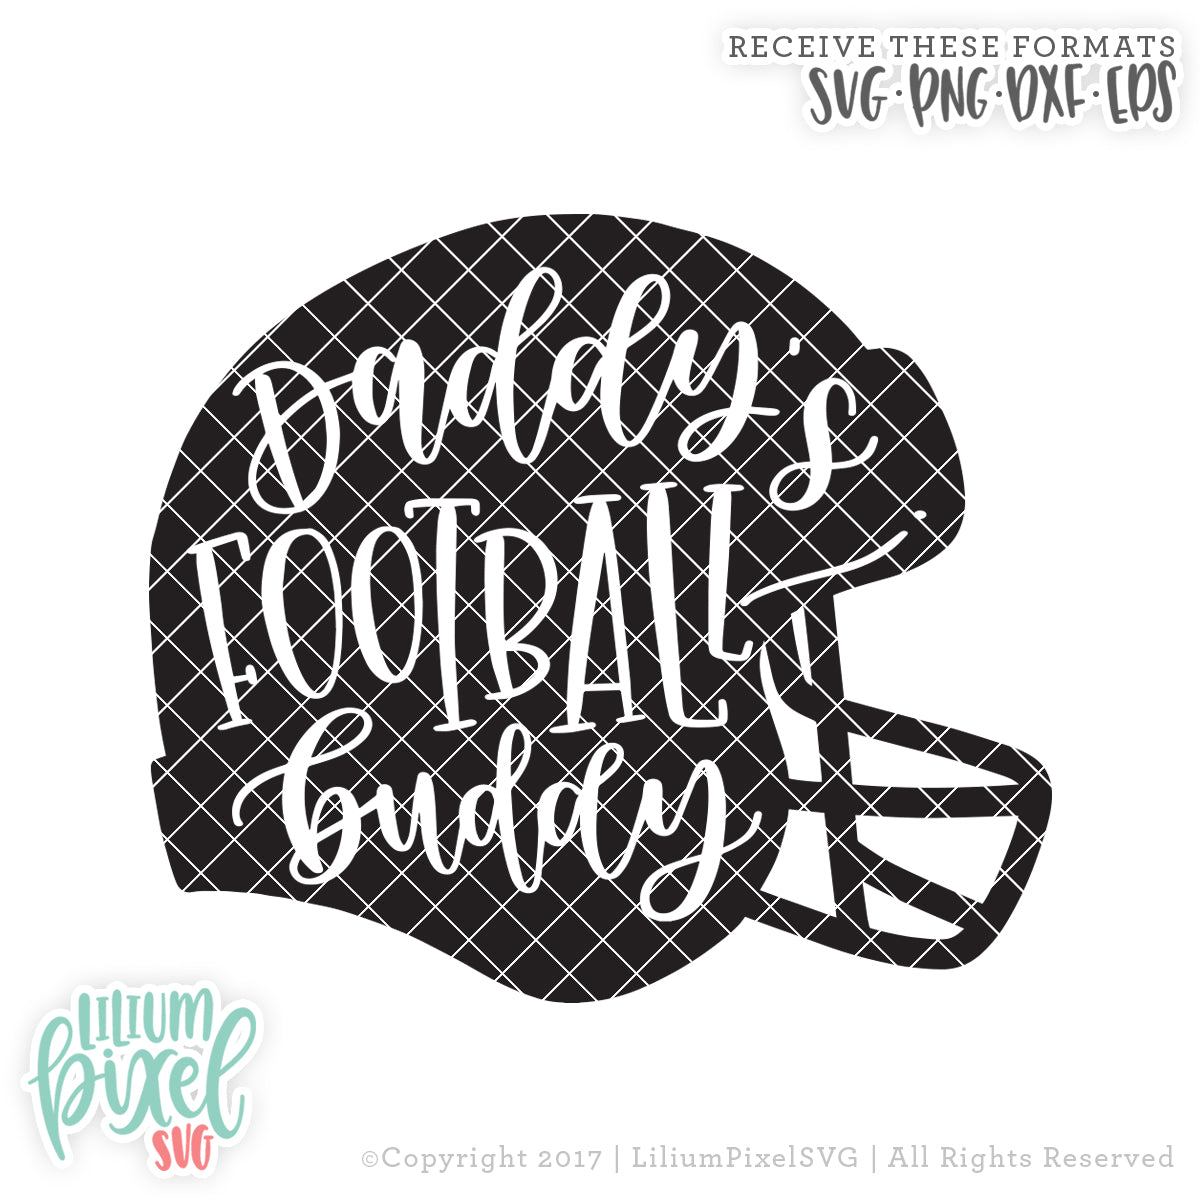 Football Helmet - Daddys Football Buddy - SVG PNG DXF EPS Cut File • Silhouette • Cricut • More